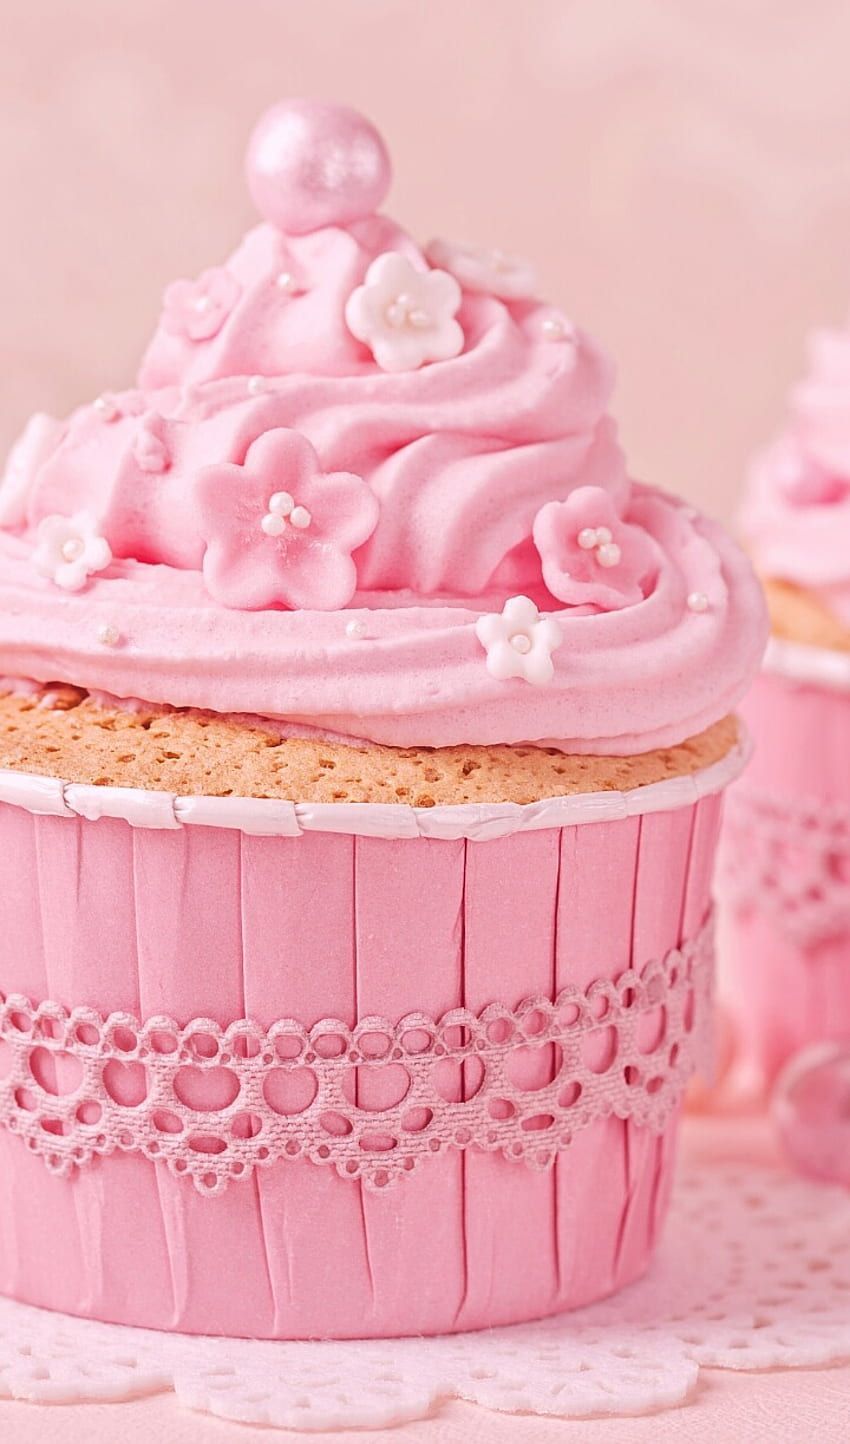 Art, background, beautiful, beauty, cupcake, decor, decorate, decoration, delicious, dessert, food, pastel, pink, pink cupcakes, style